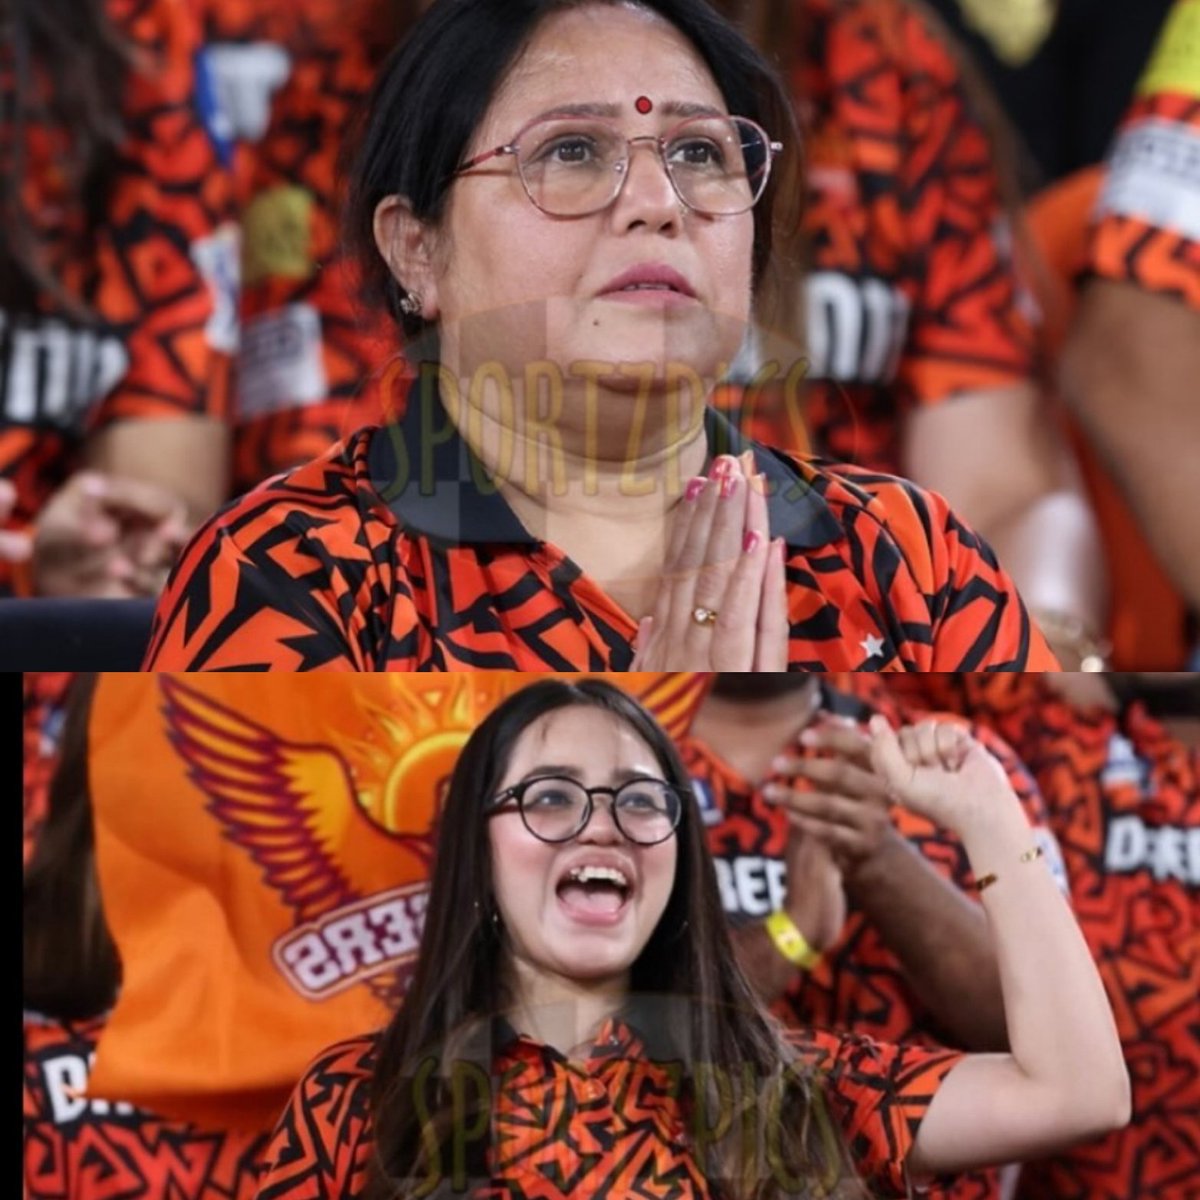 A special shoutout to Abhishek Sharma's mom and sister for being the heartbeat of SRH support! 🧡